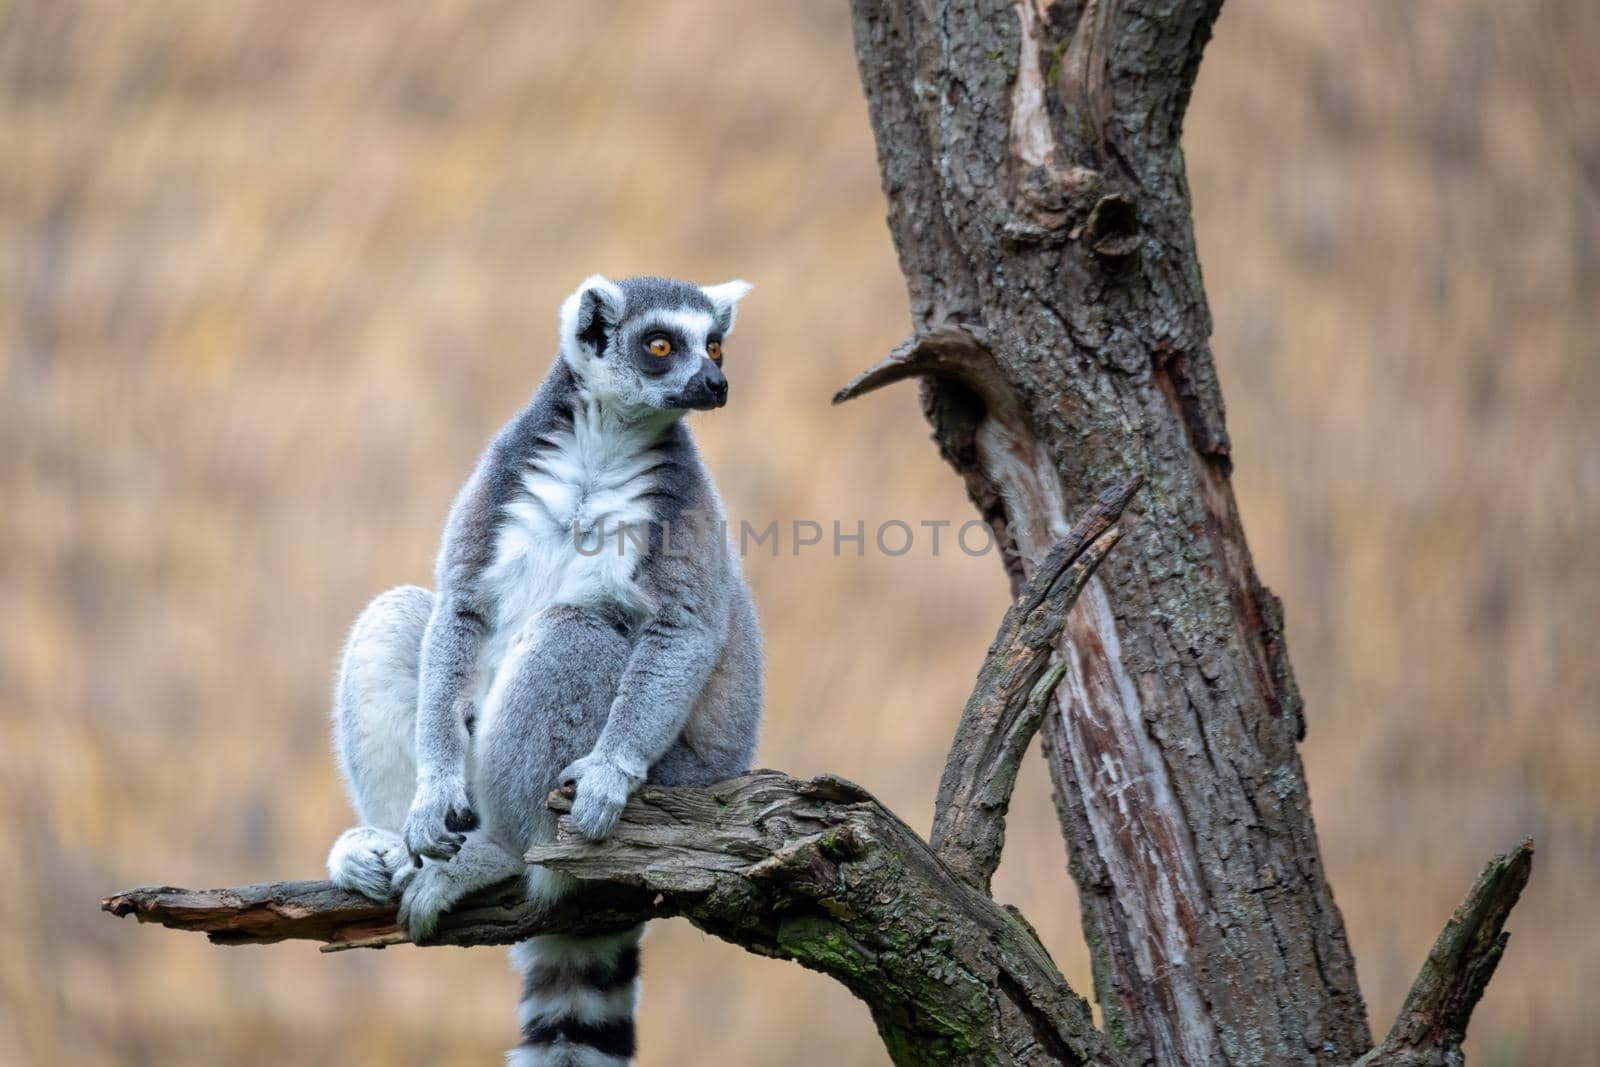 cute and playful Ring-tailed lemur, endemic animal in Madagascar